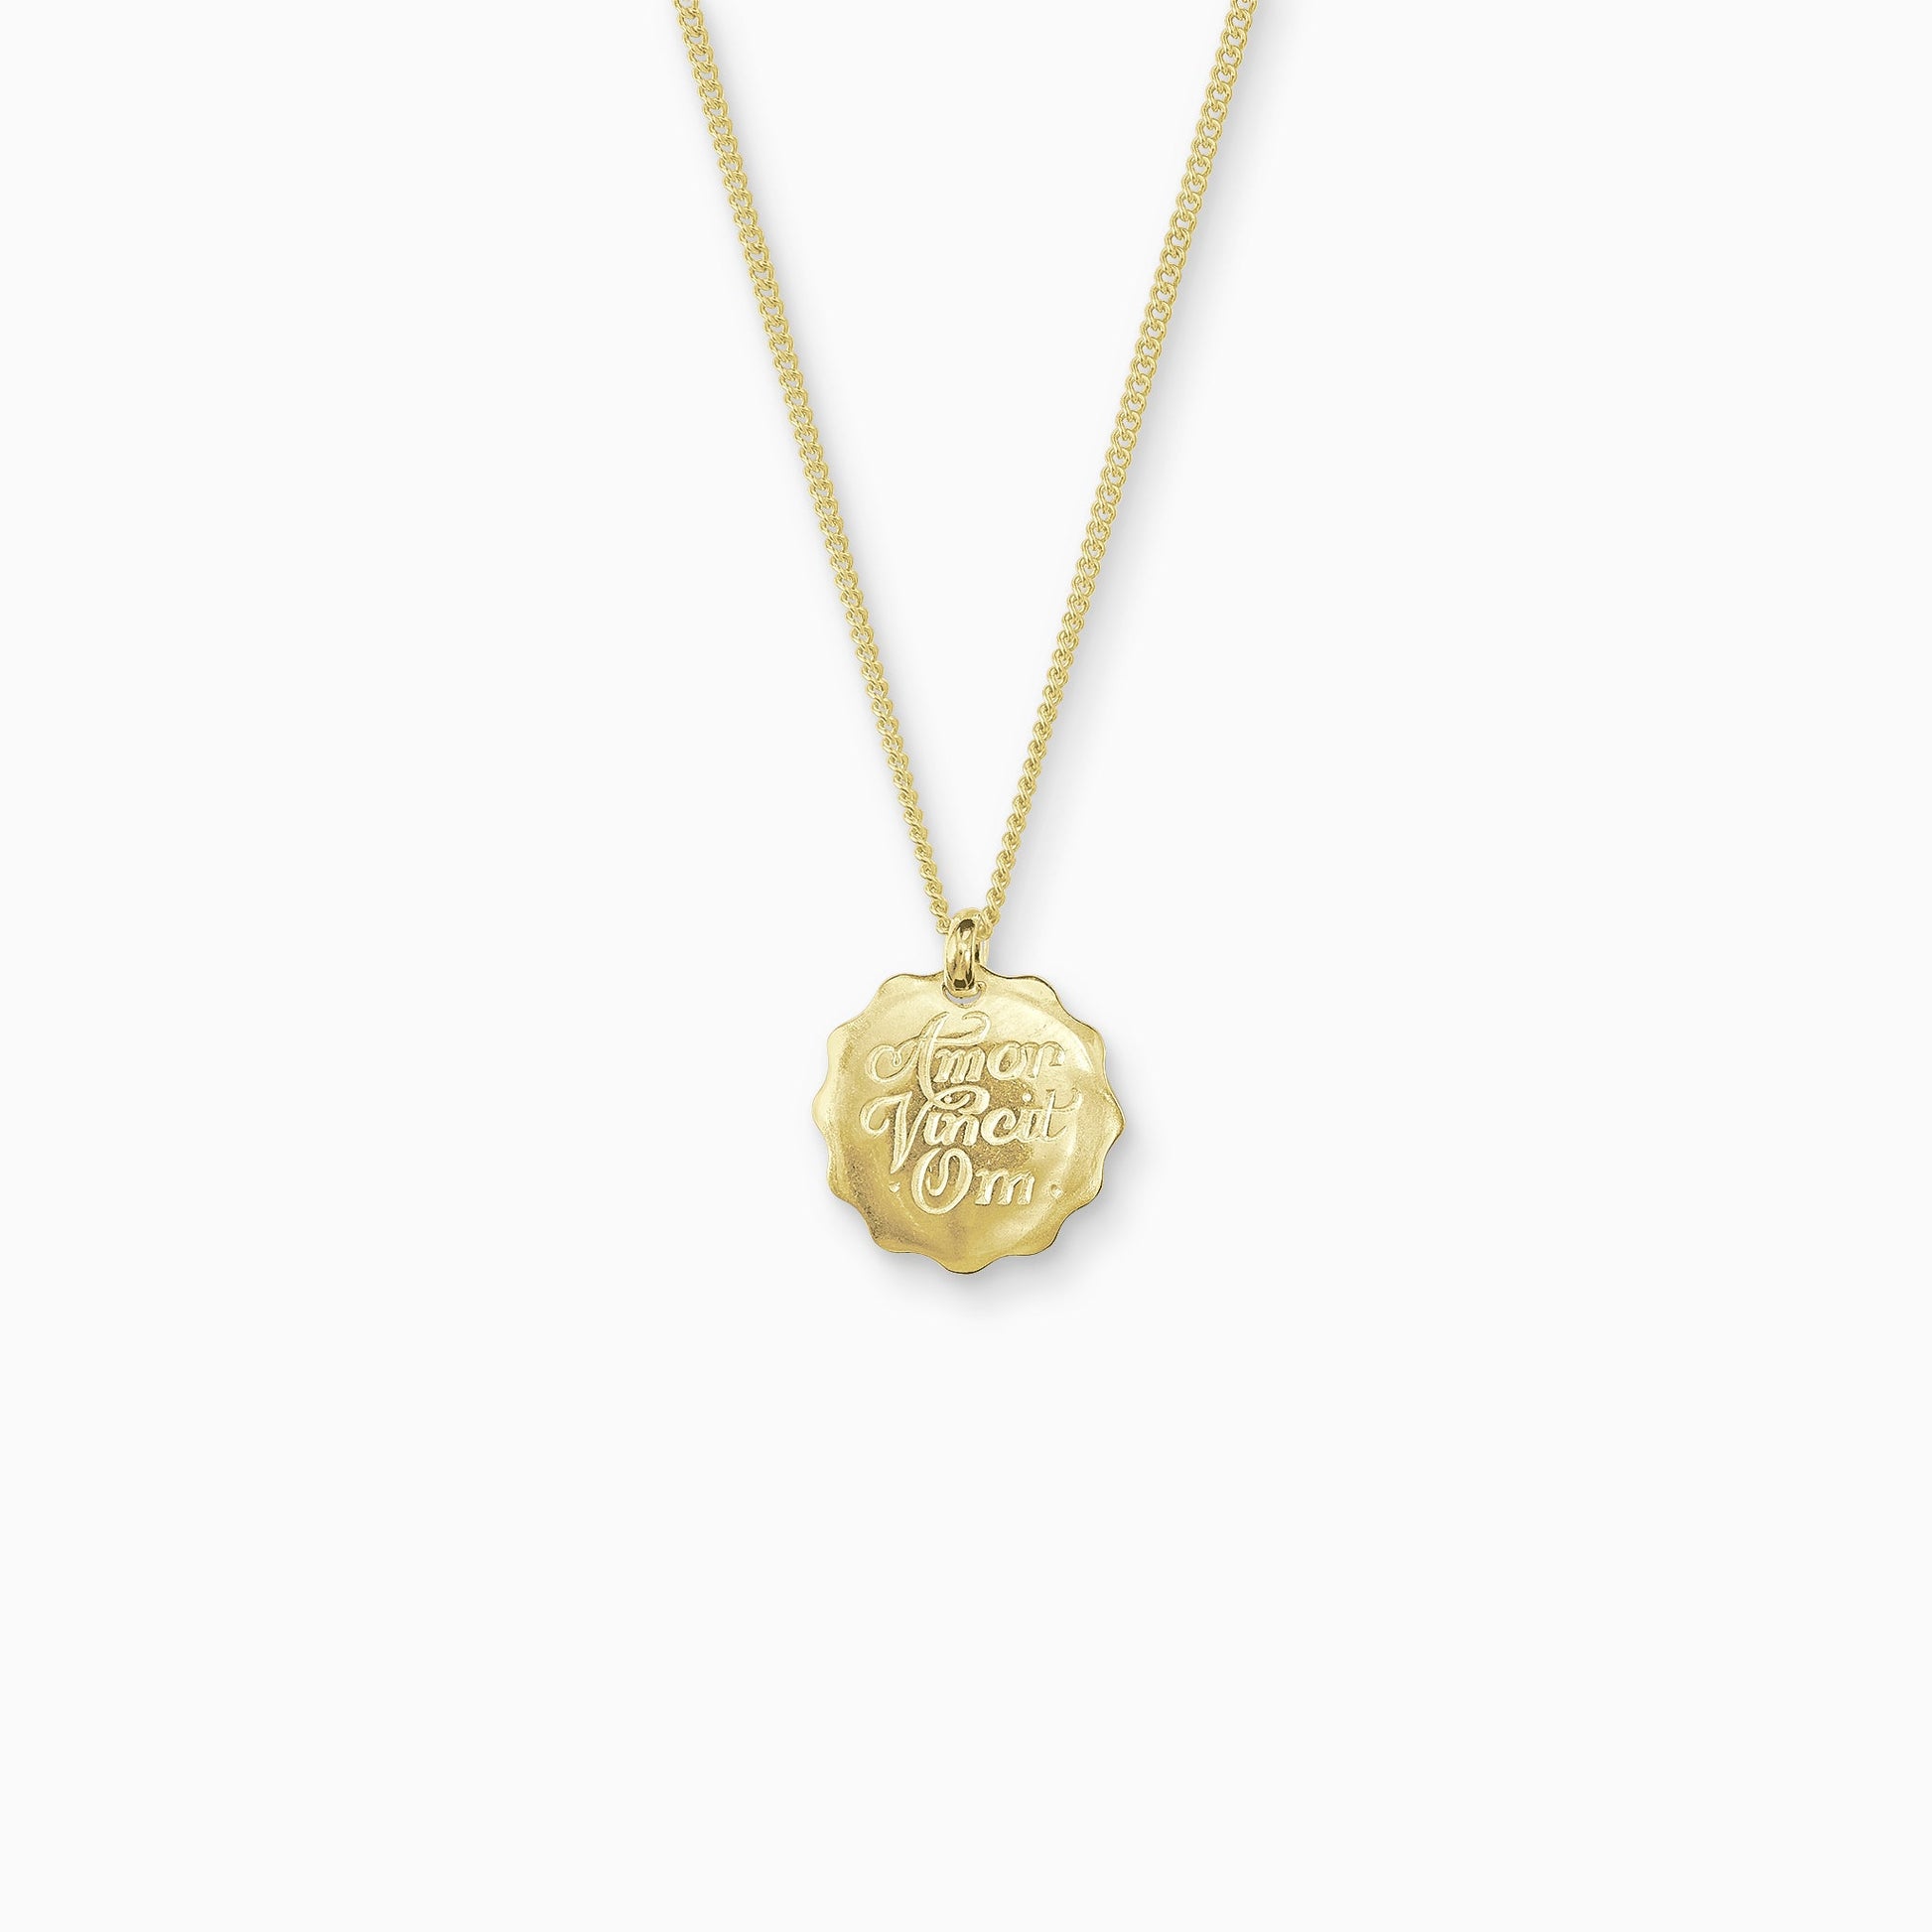 18ct Fairtrade yellow gold round 22mm diameter charm on a 45cm fine curb chain. The pendant is smooth with a wavy outside edge. Amor Vincit Om, the Medieval Latin for Love Conquers All  is inscribed on the front in a Copperplate script. 